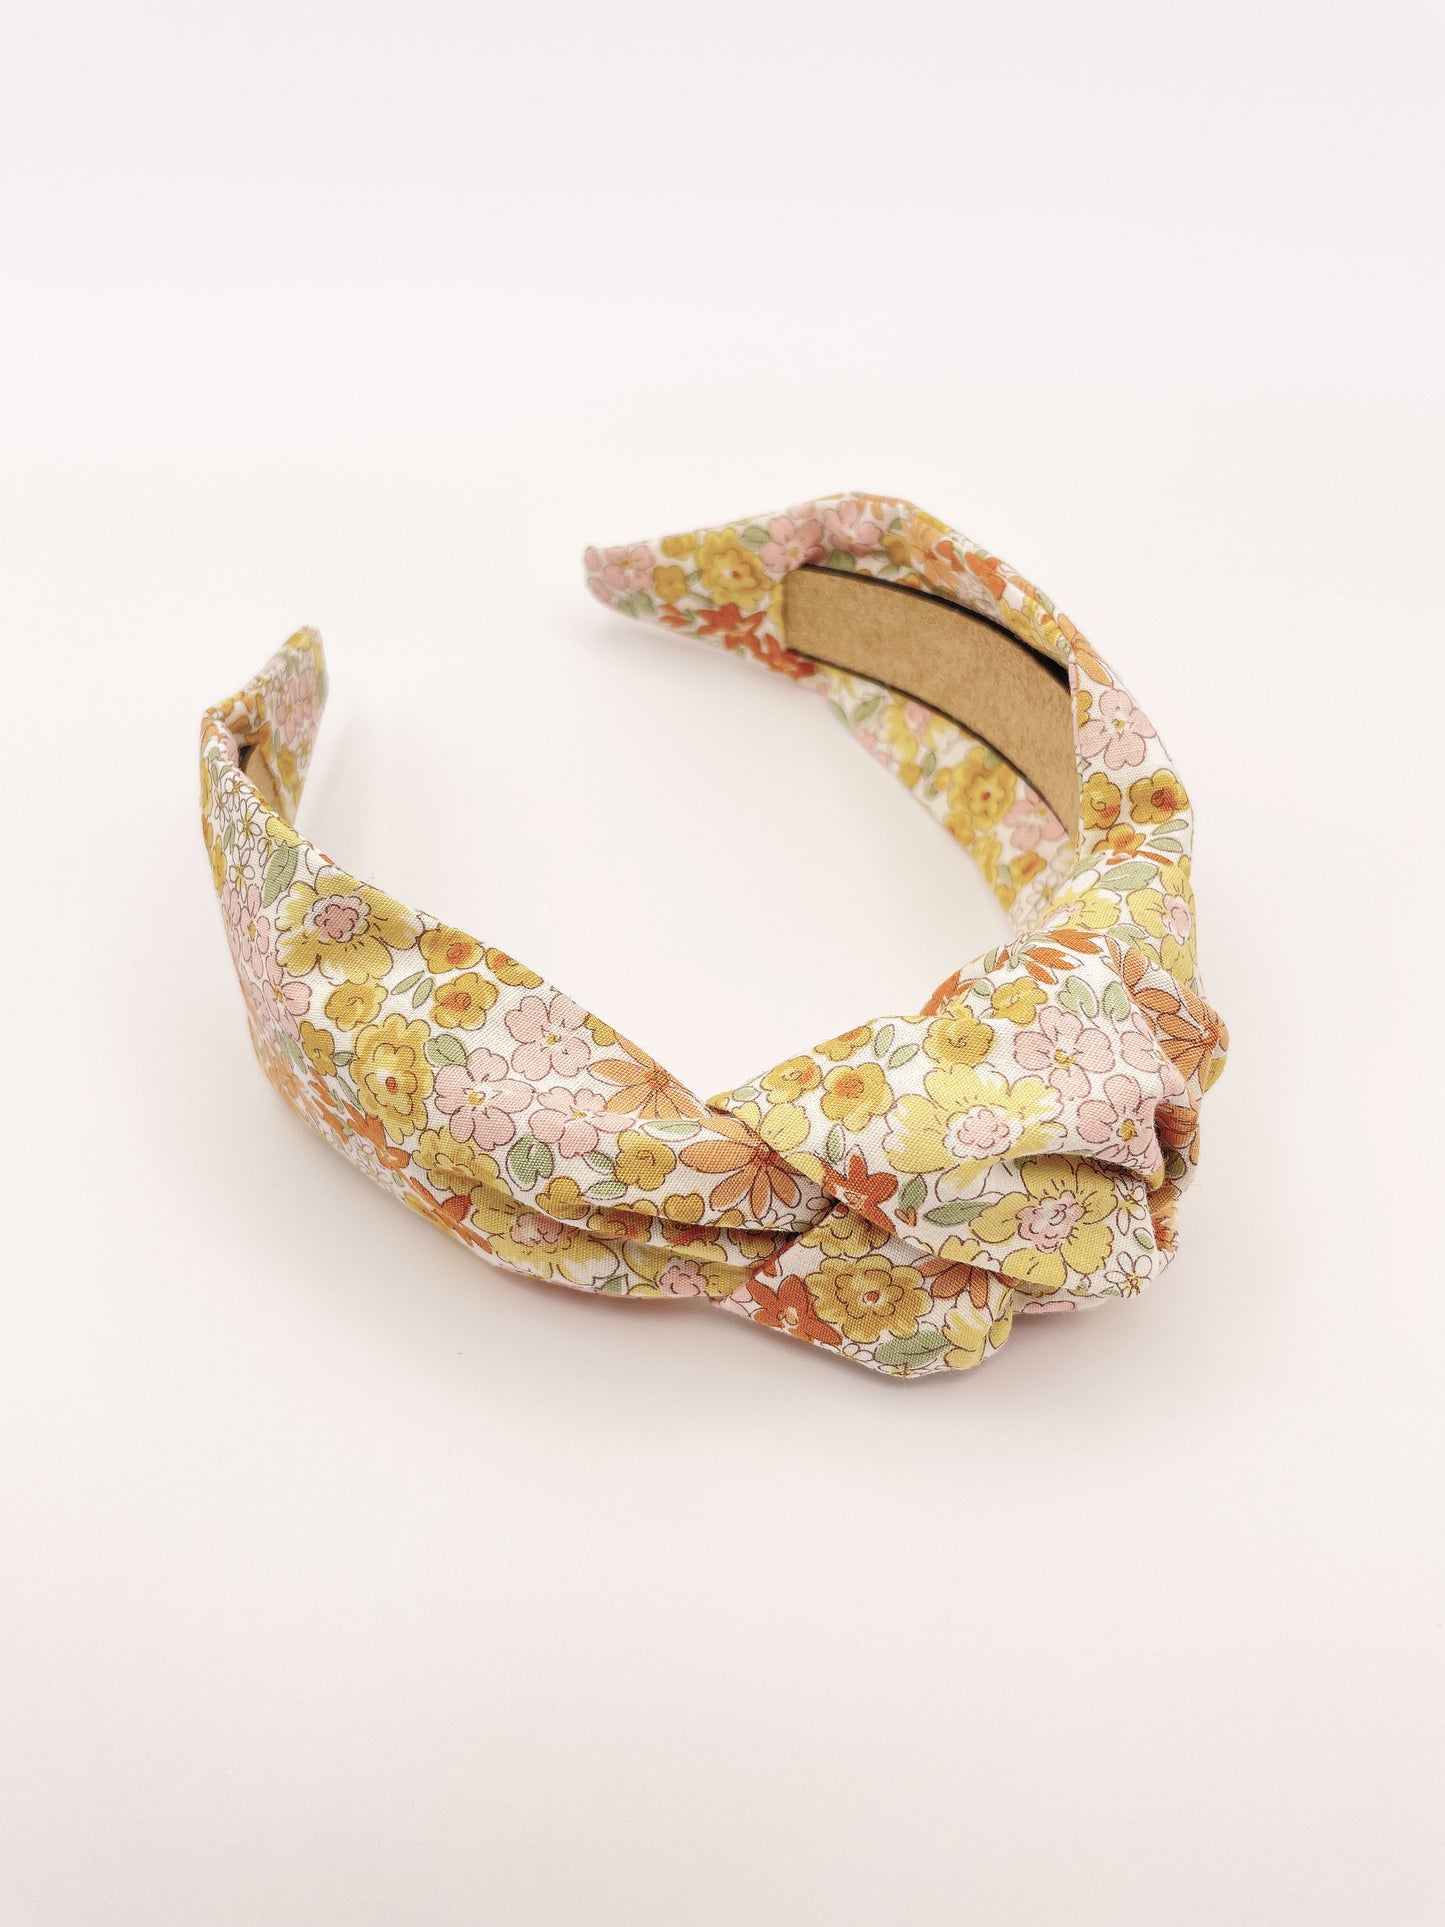 Handmade knotted headband with yellow flowers against an off white background